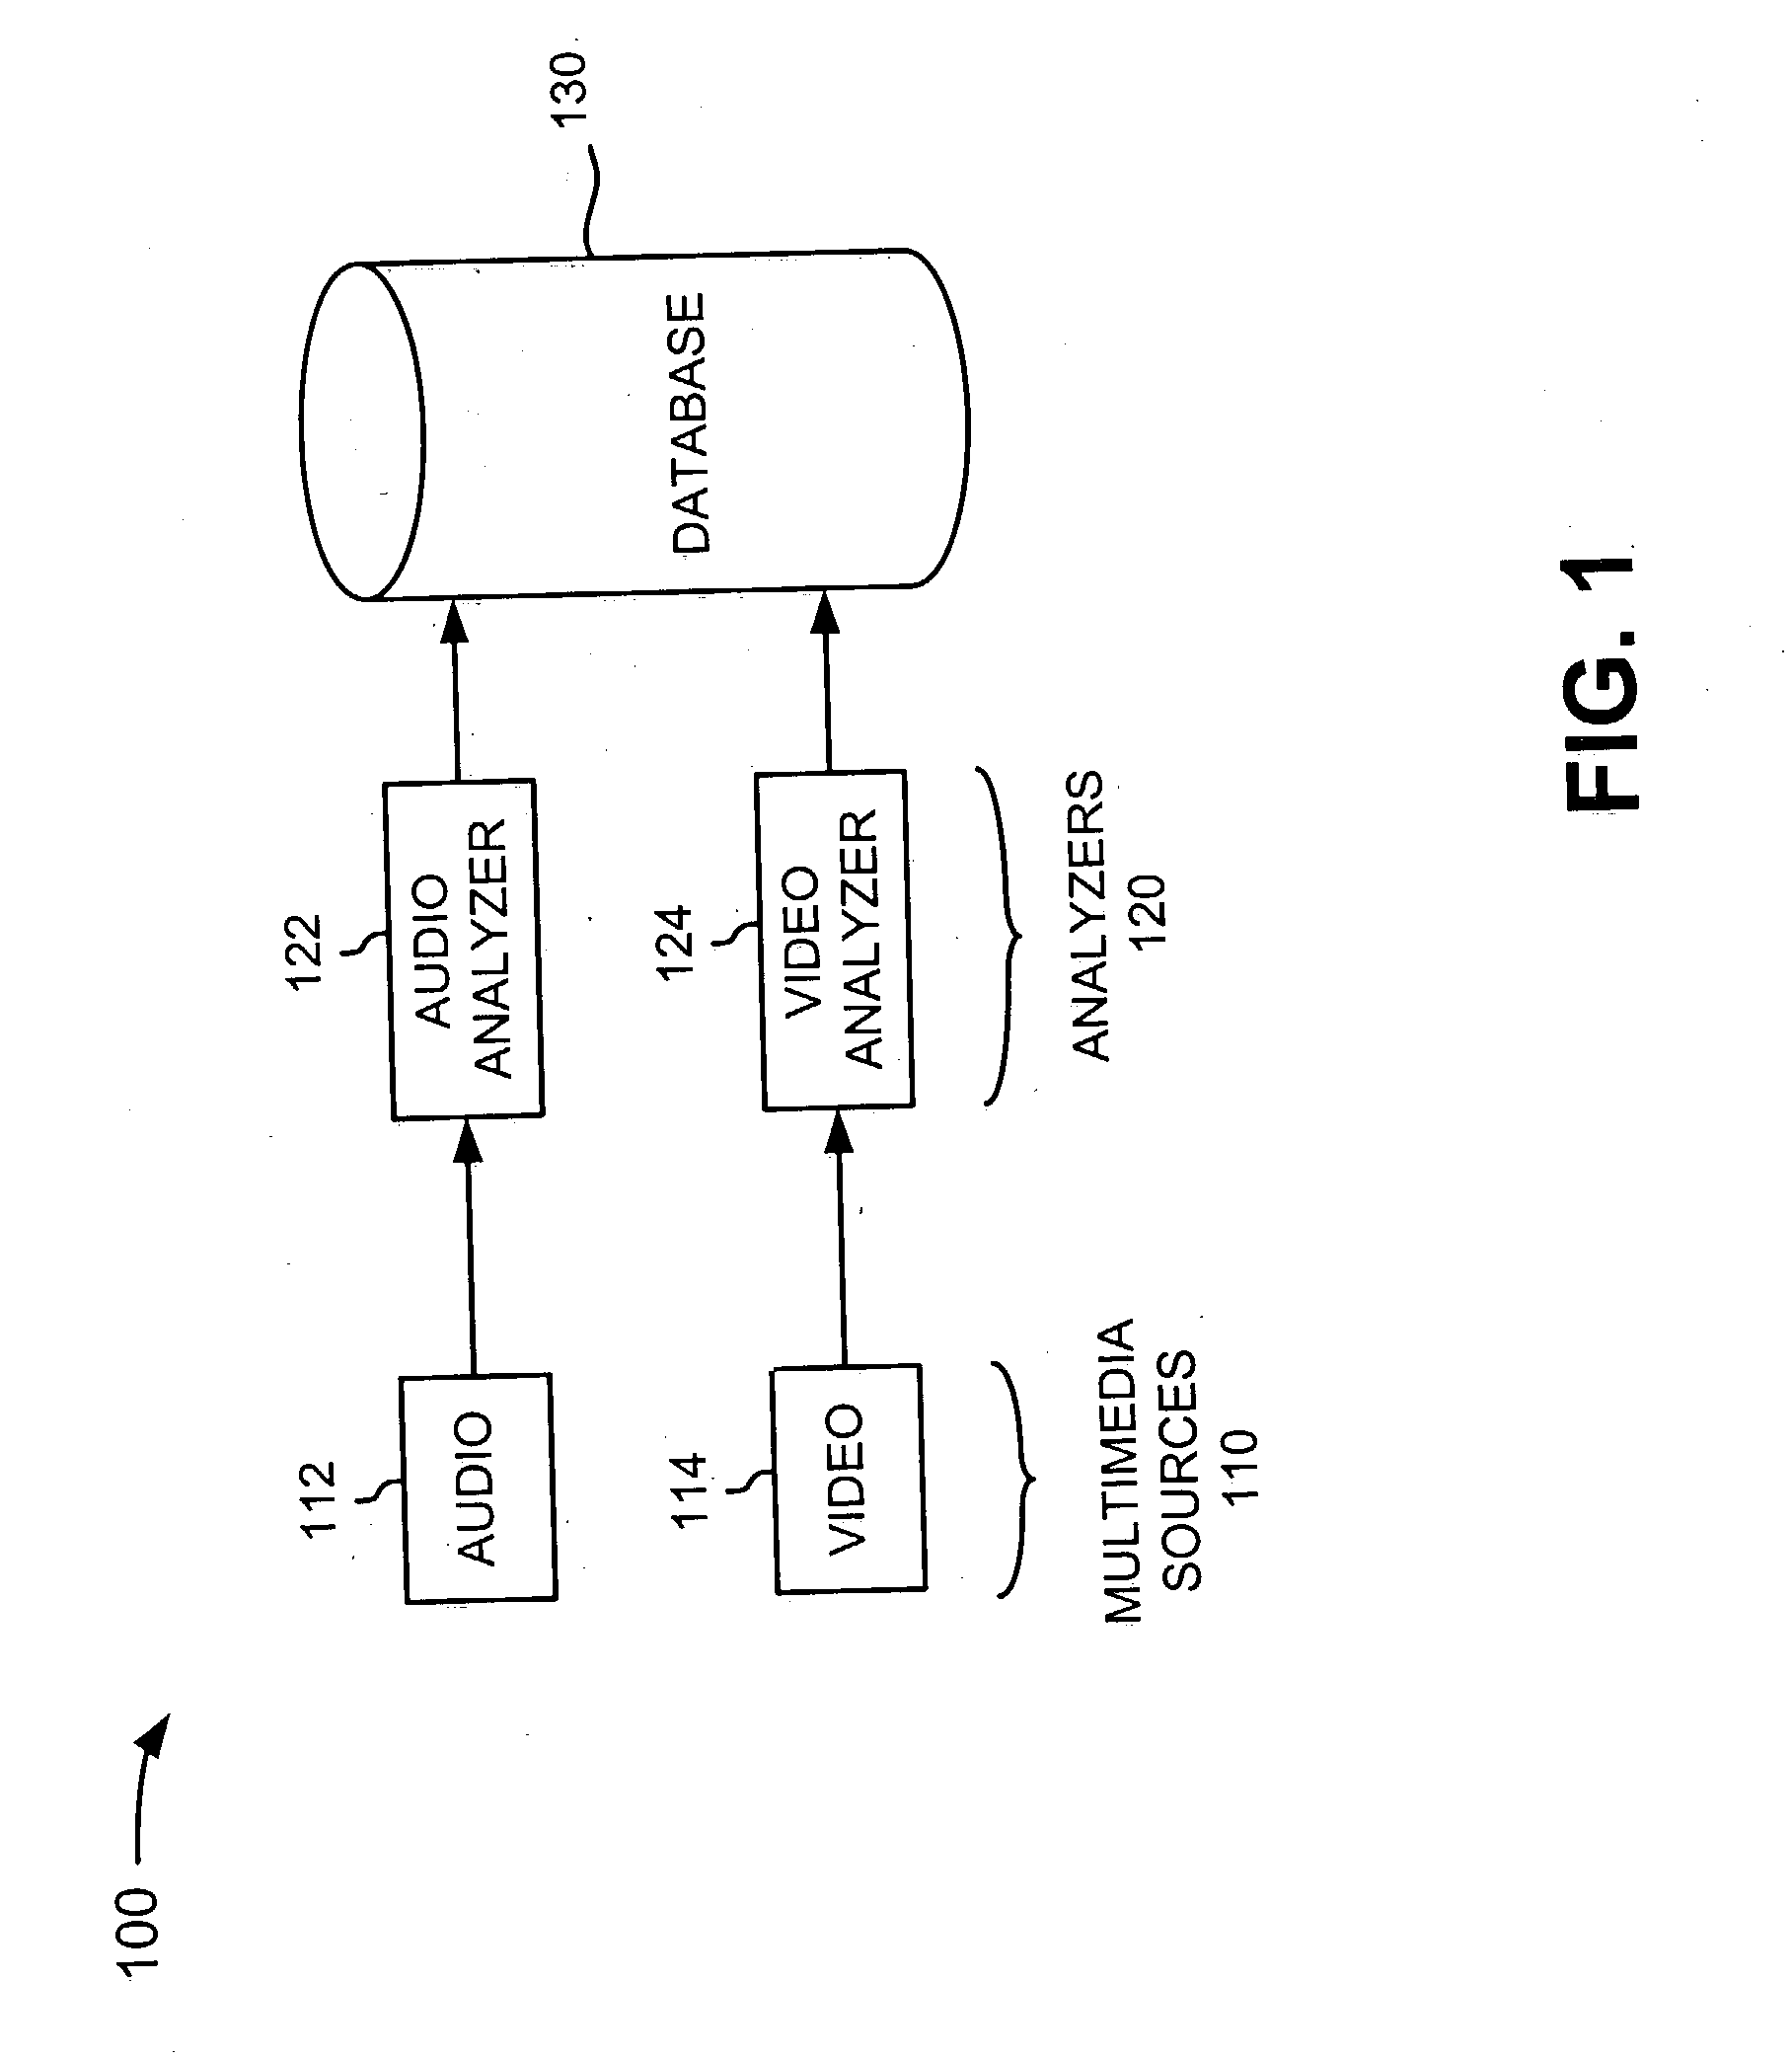 Systems and methods for providing acoustic classification